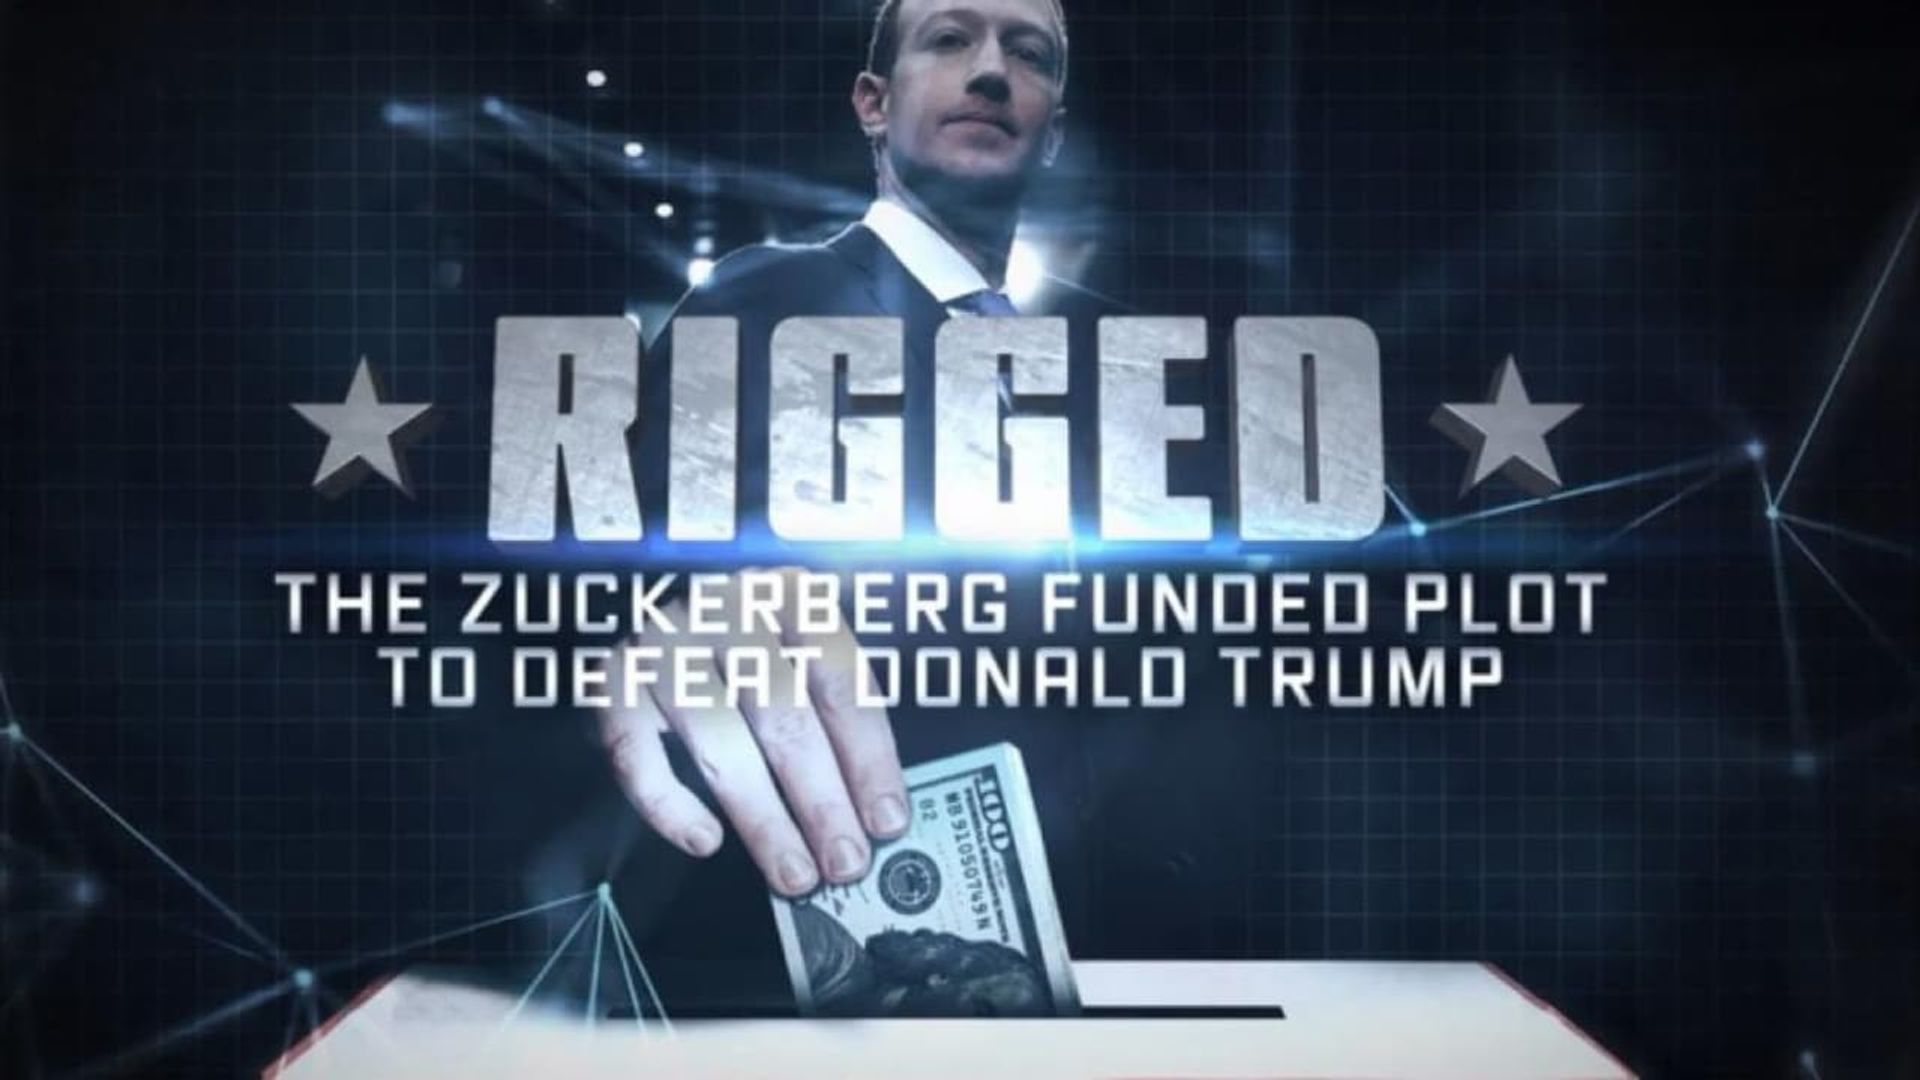 Rigged: The Zuckerberg Funded Plot to Defeat Donald Trump background